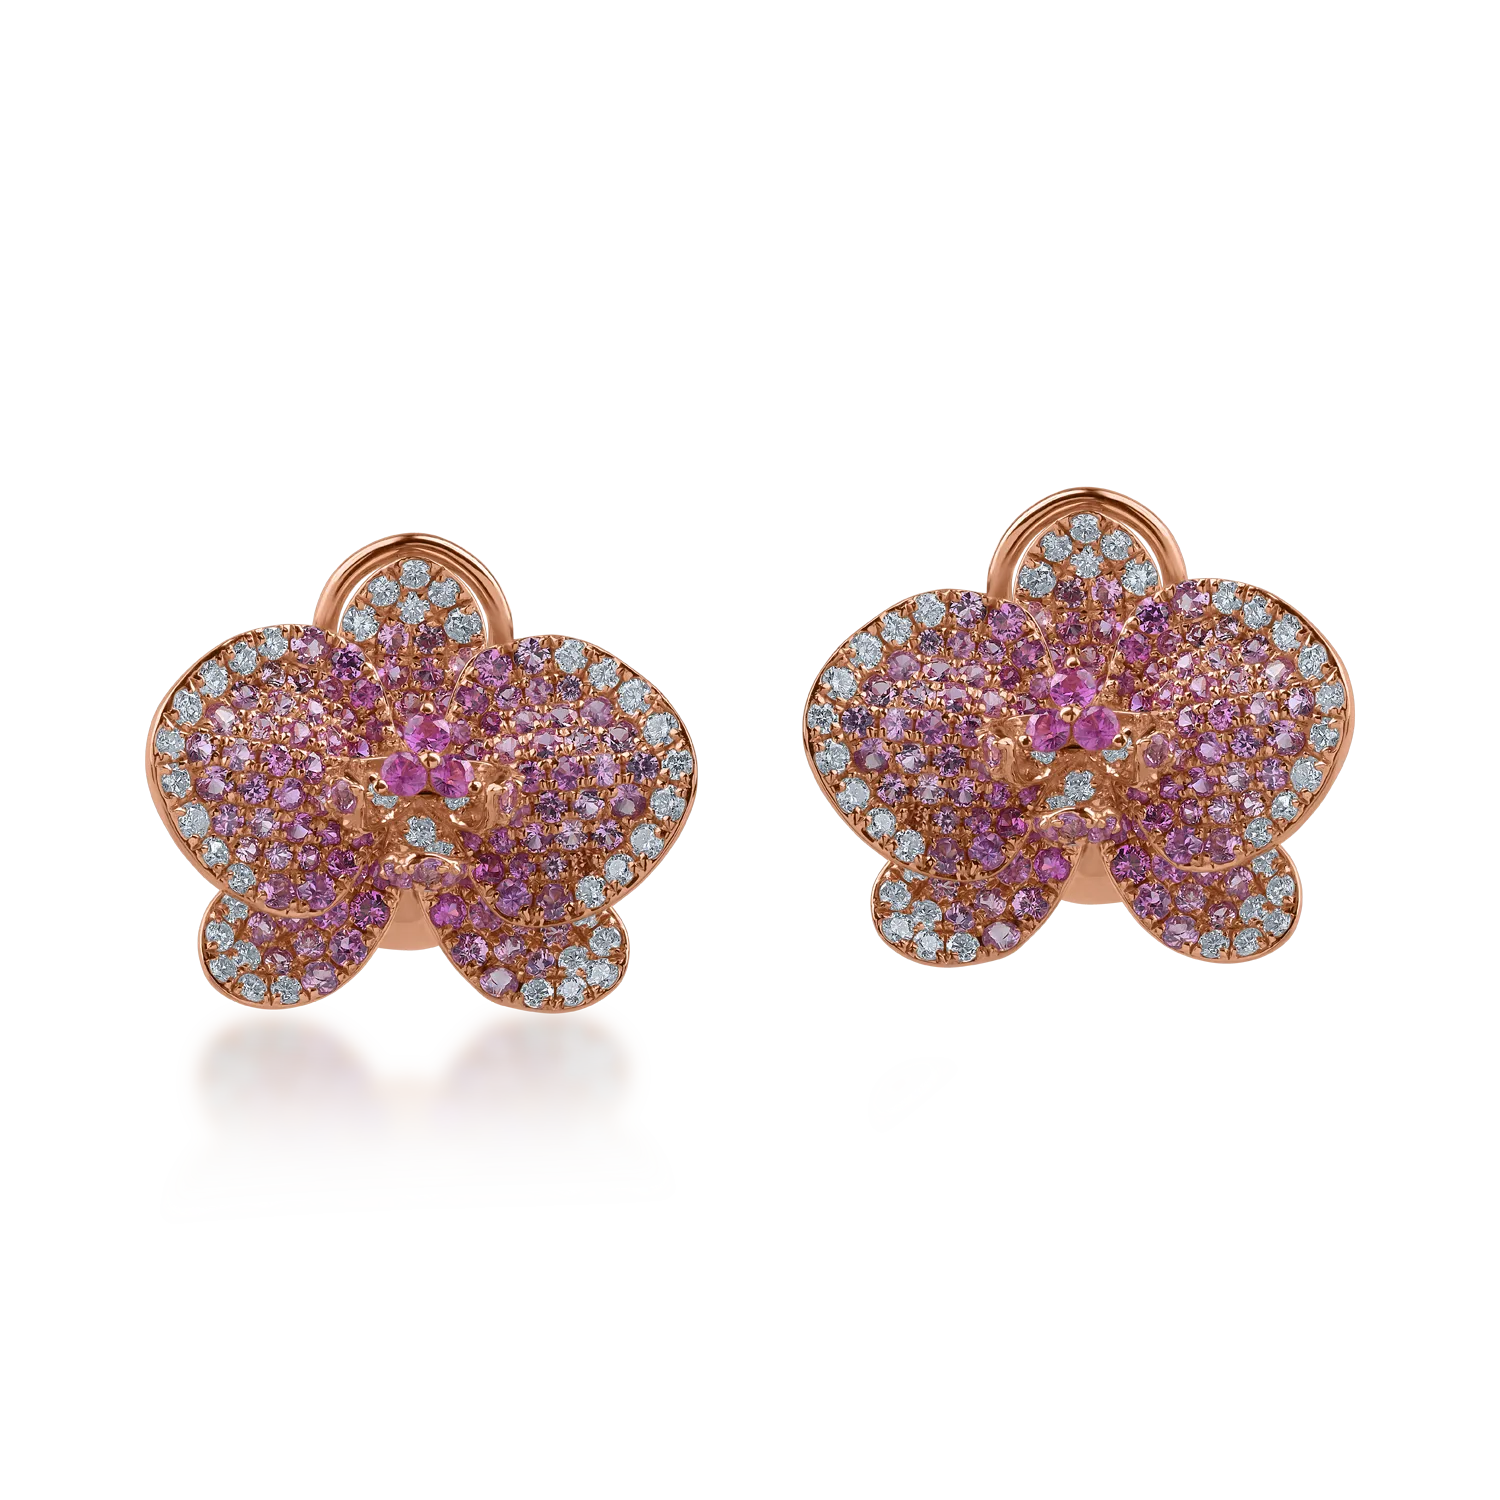 Rose gold flower earrings with 2.2ct pink sapphires and 0.55ct diamonds